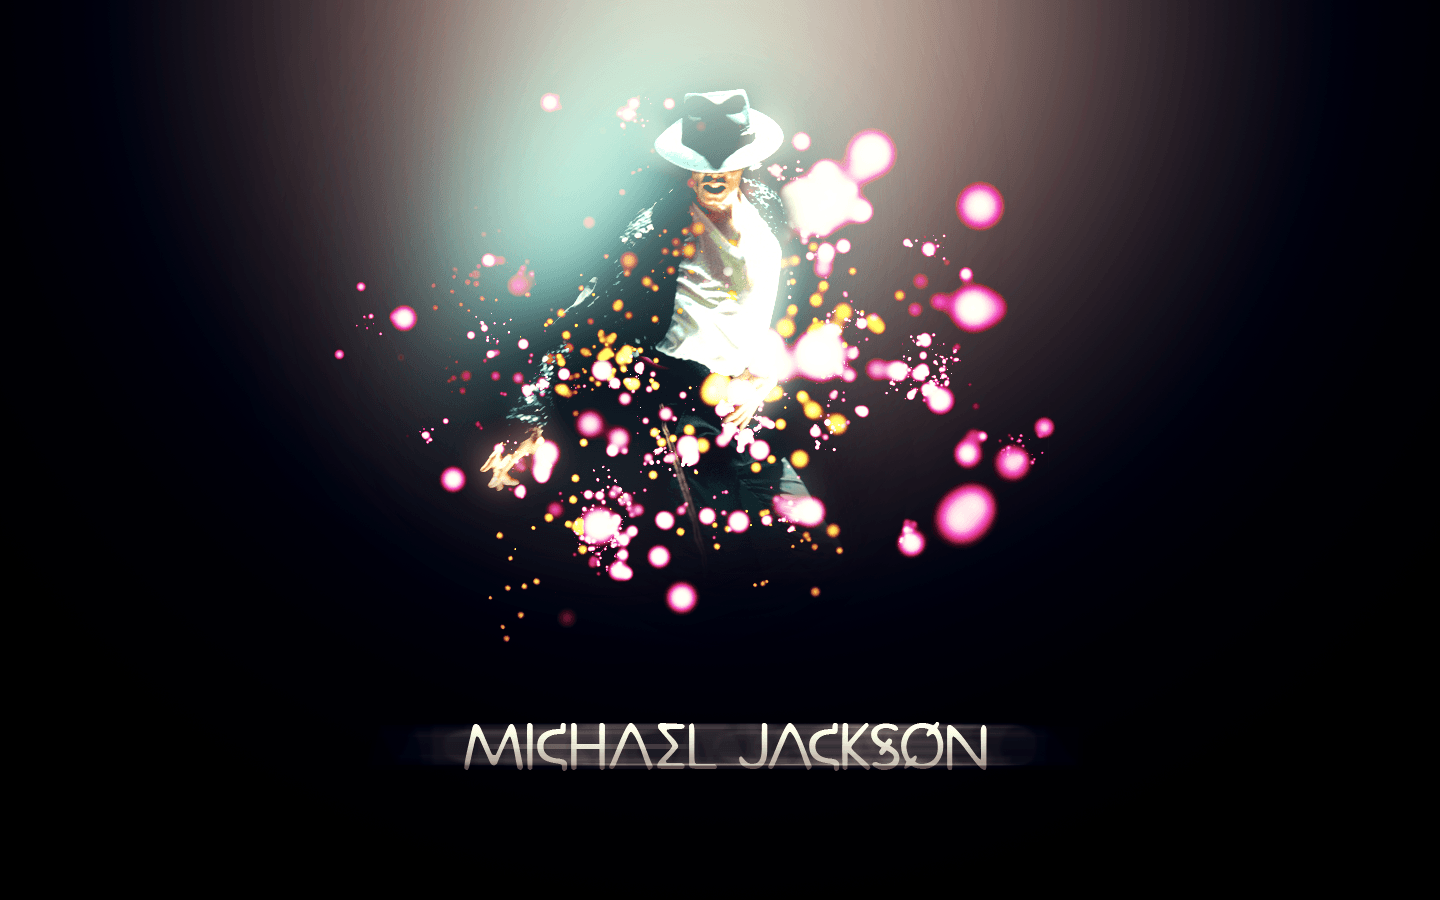 Michael Jackson image KING OF POP HD wallpaper and background